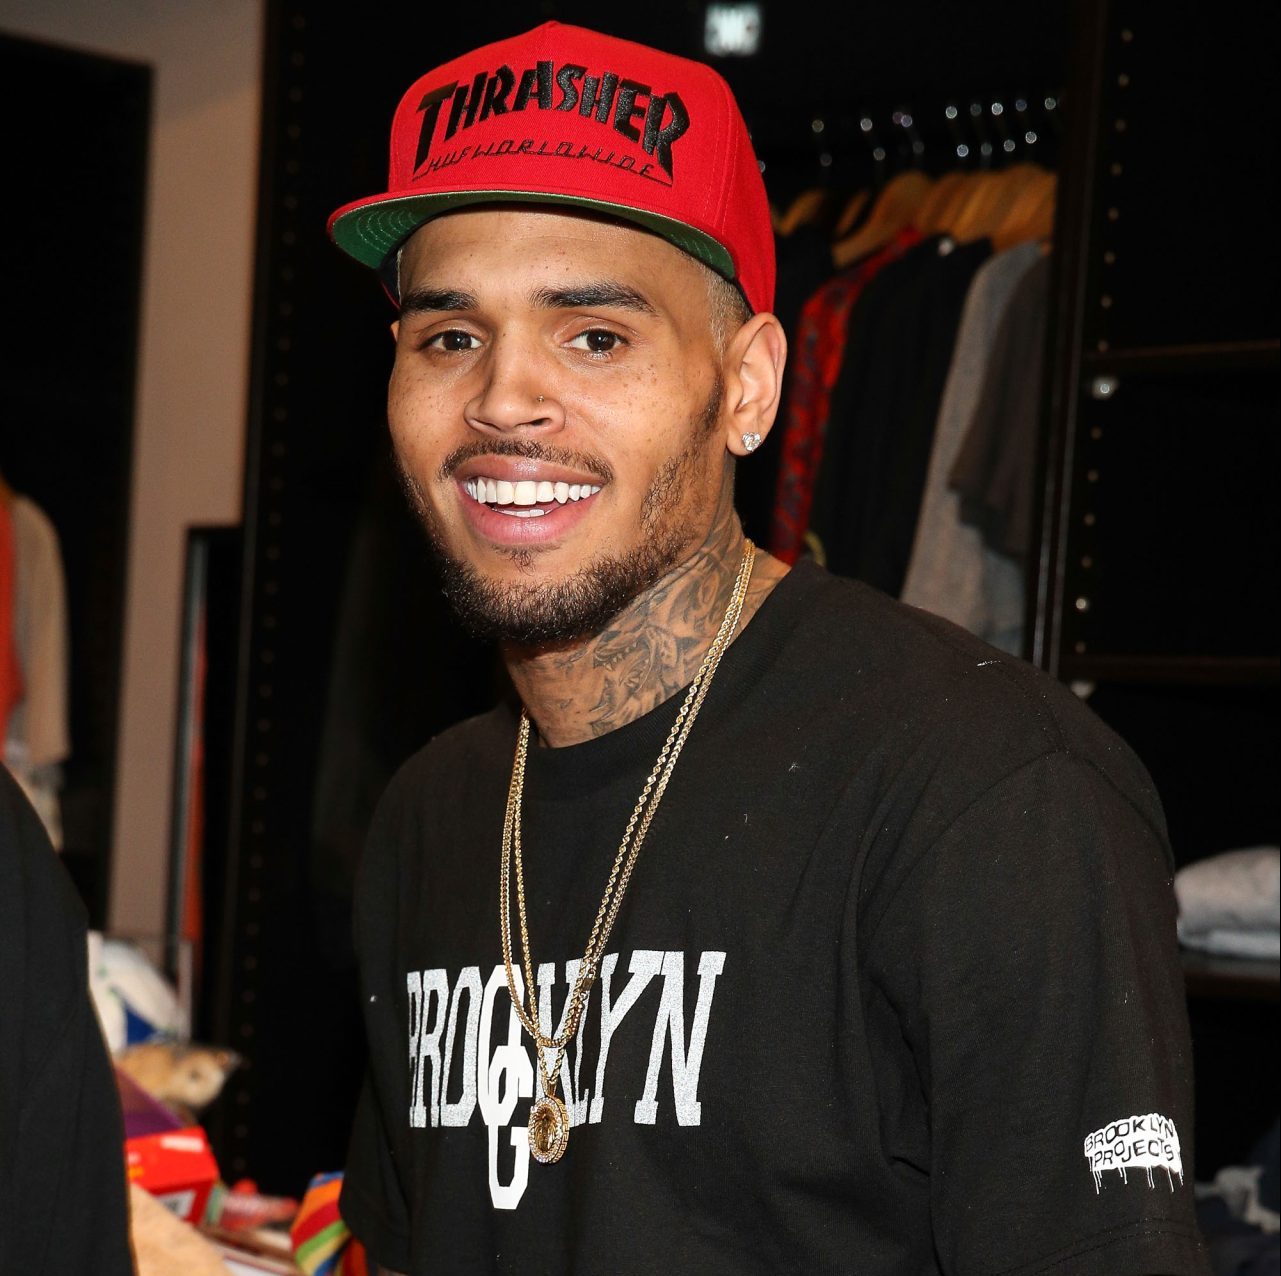 Chris Brown Shares The Tracklist For His New Album 'Breezy'